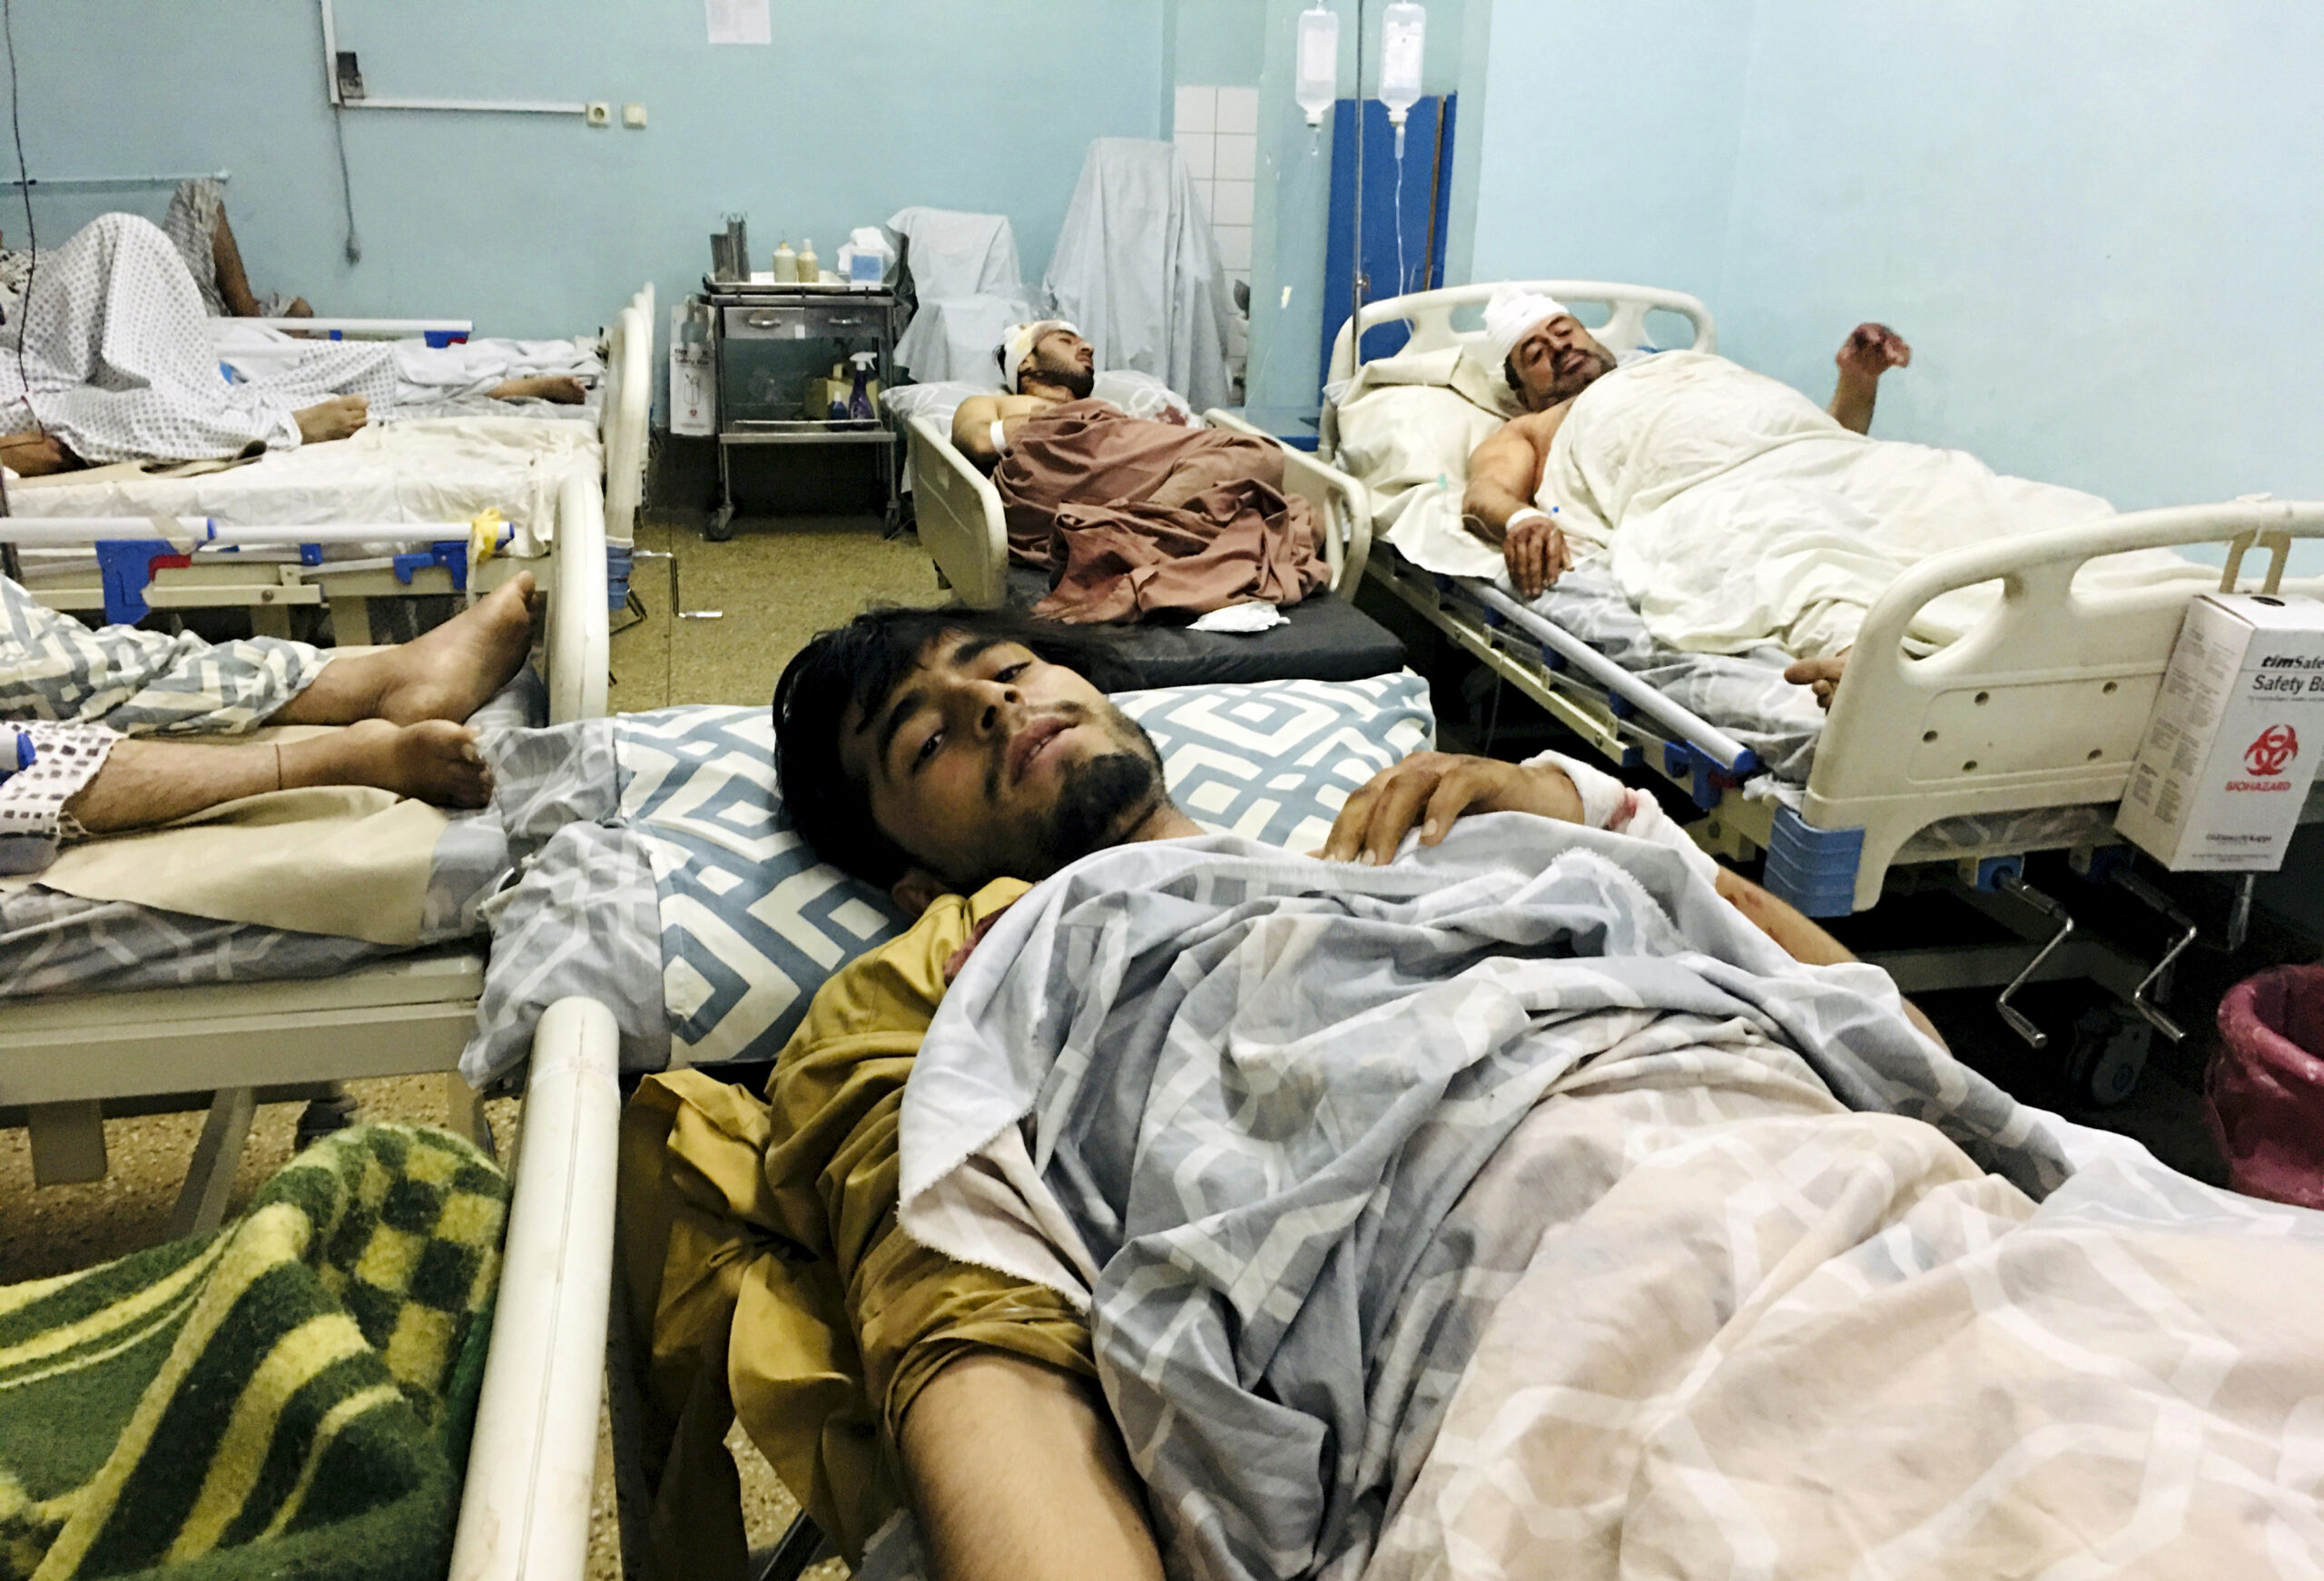 Wounded Afghans lie on a bed at a hospital after a deadly explosions outside the airport in Kabul, Afghanistan, Thursday, Aug. 26, 2021. Two suicide bombers and gunmen attacked crowds of Afghans flocking to Kabul's airport Thursday, transforming a scene of desperation into one of horror in the waning days of an airlift for those fleeing the Taliban takeover. (AP Photo/Mohammad Asif Khan)